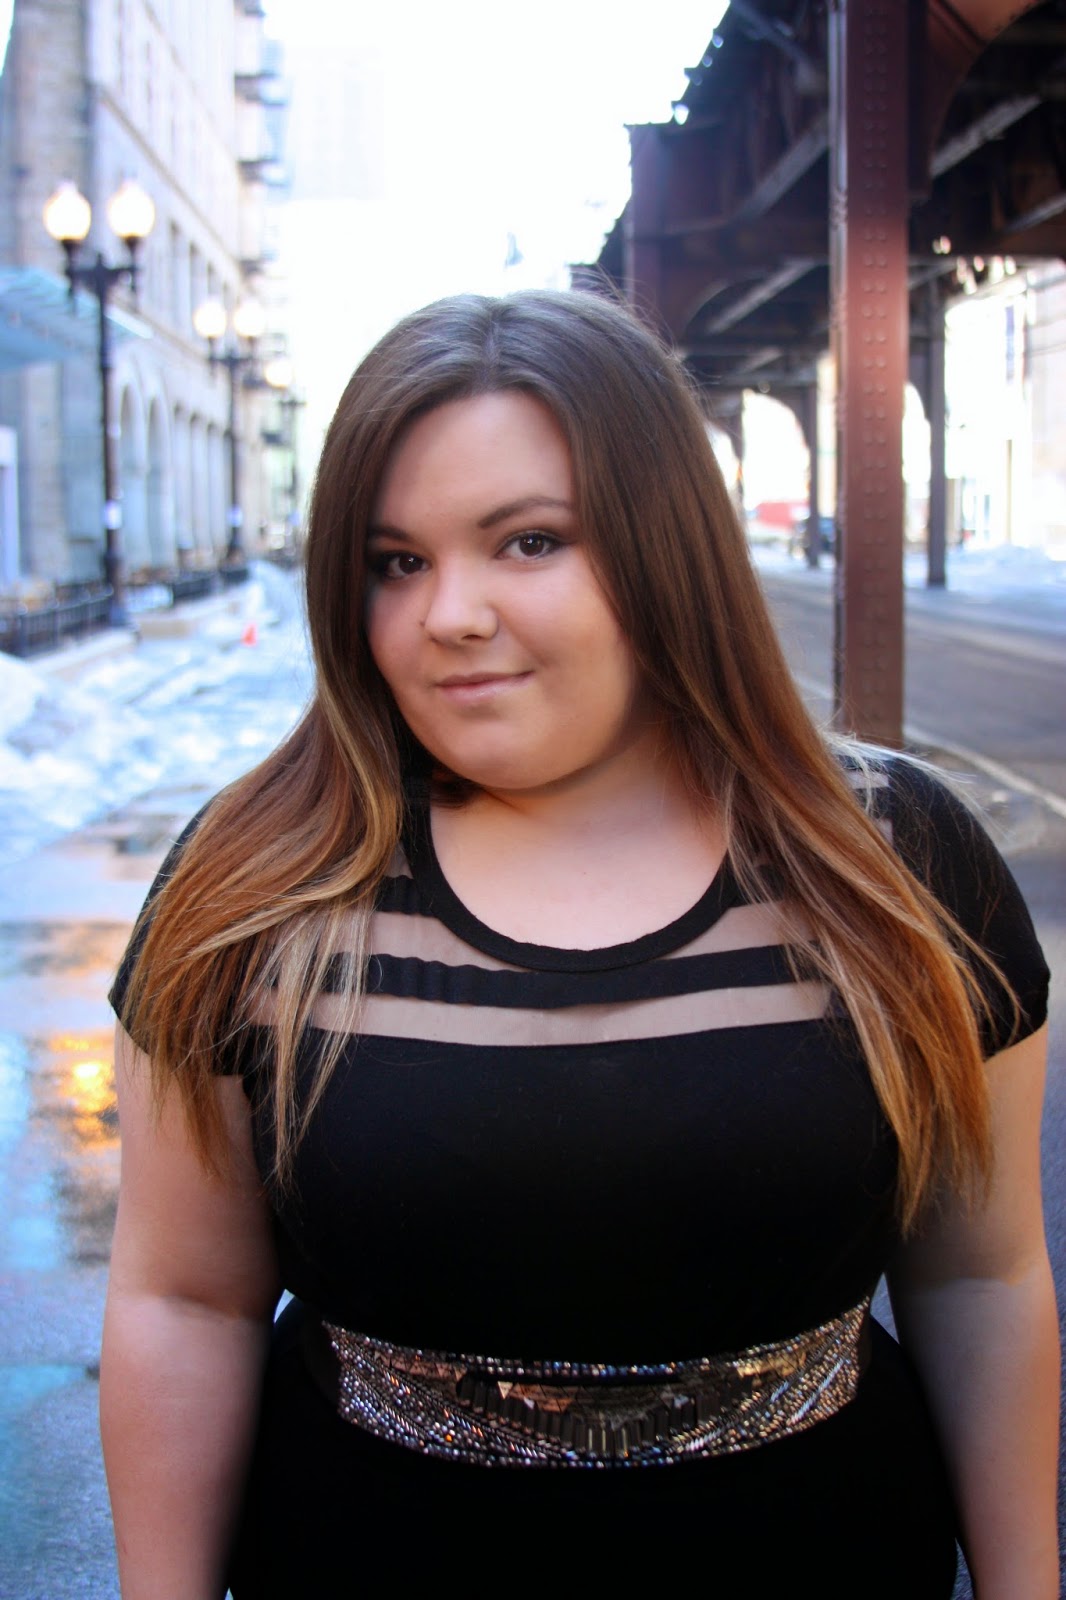 how to wear a belt, curvy fashionista, bbw, natalie craig, natalie in the city, chicago, plus size fashion blogger, curves, body positivity, fat acceptance movement, kim kardashian, ankle boots, Urban Outfitters,  ootd, outfit of the day, pencil skirt, long pencil skirt